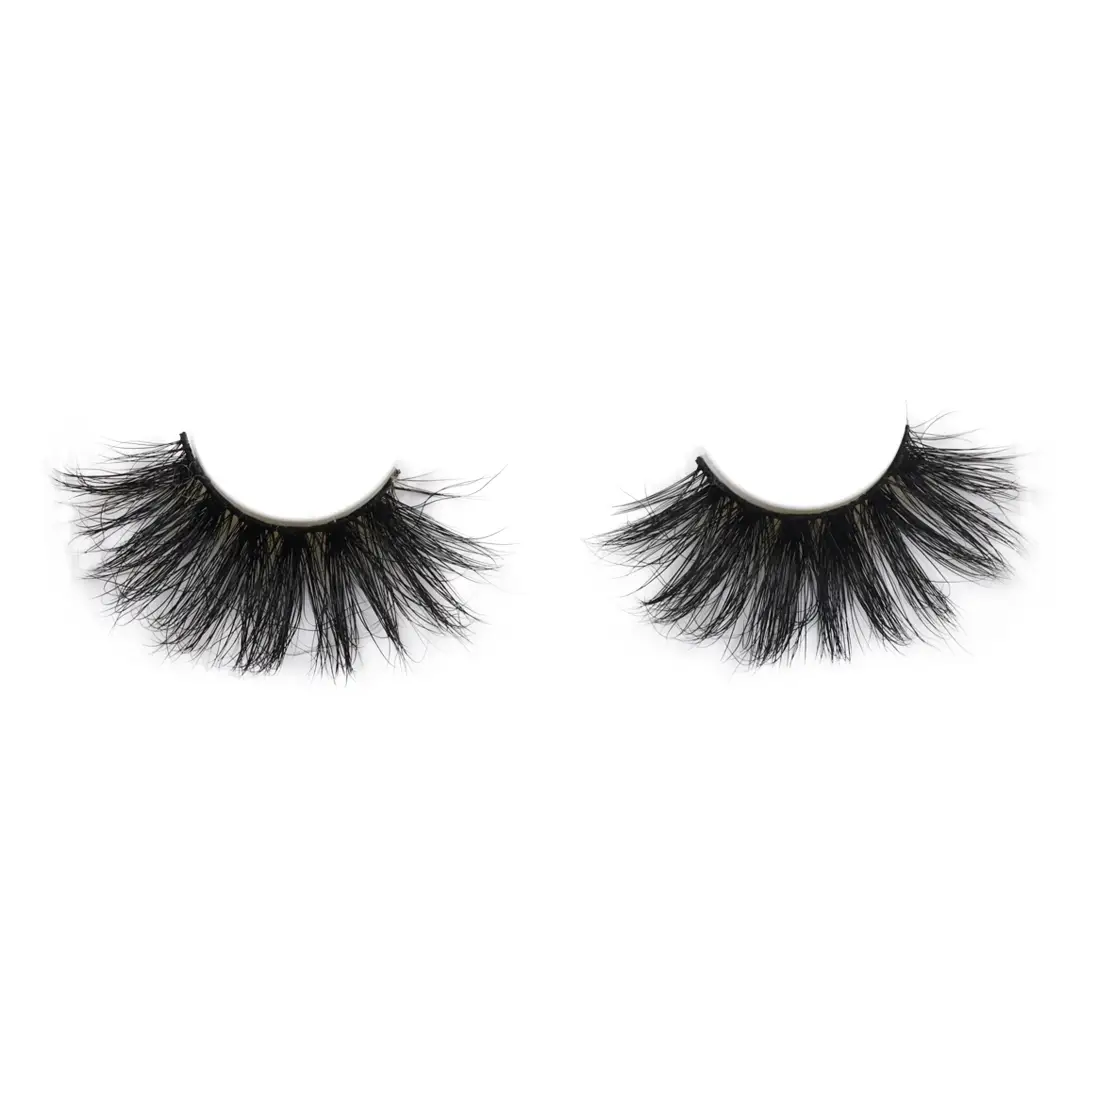 The ULTIMATE Guide to Buying 25mm Lashes Bulk